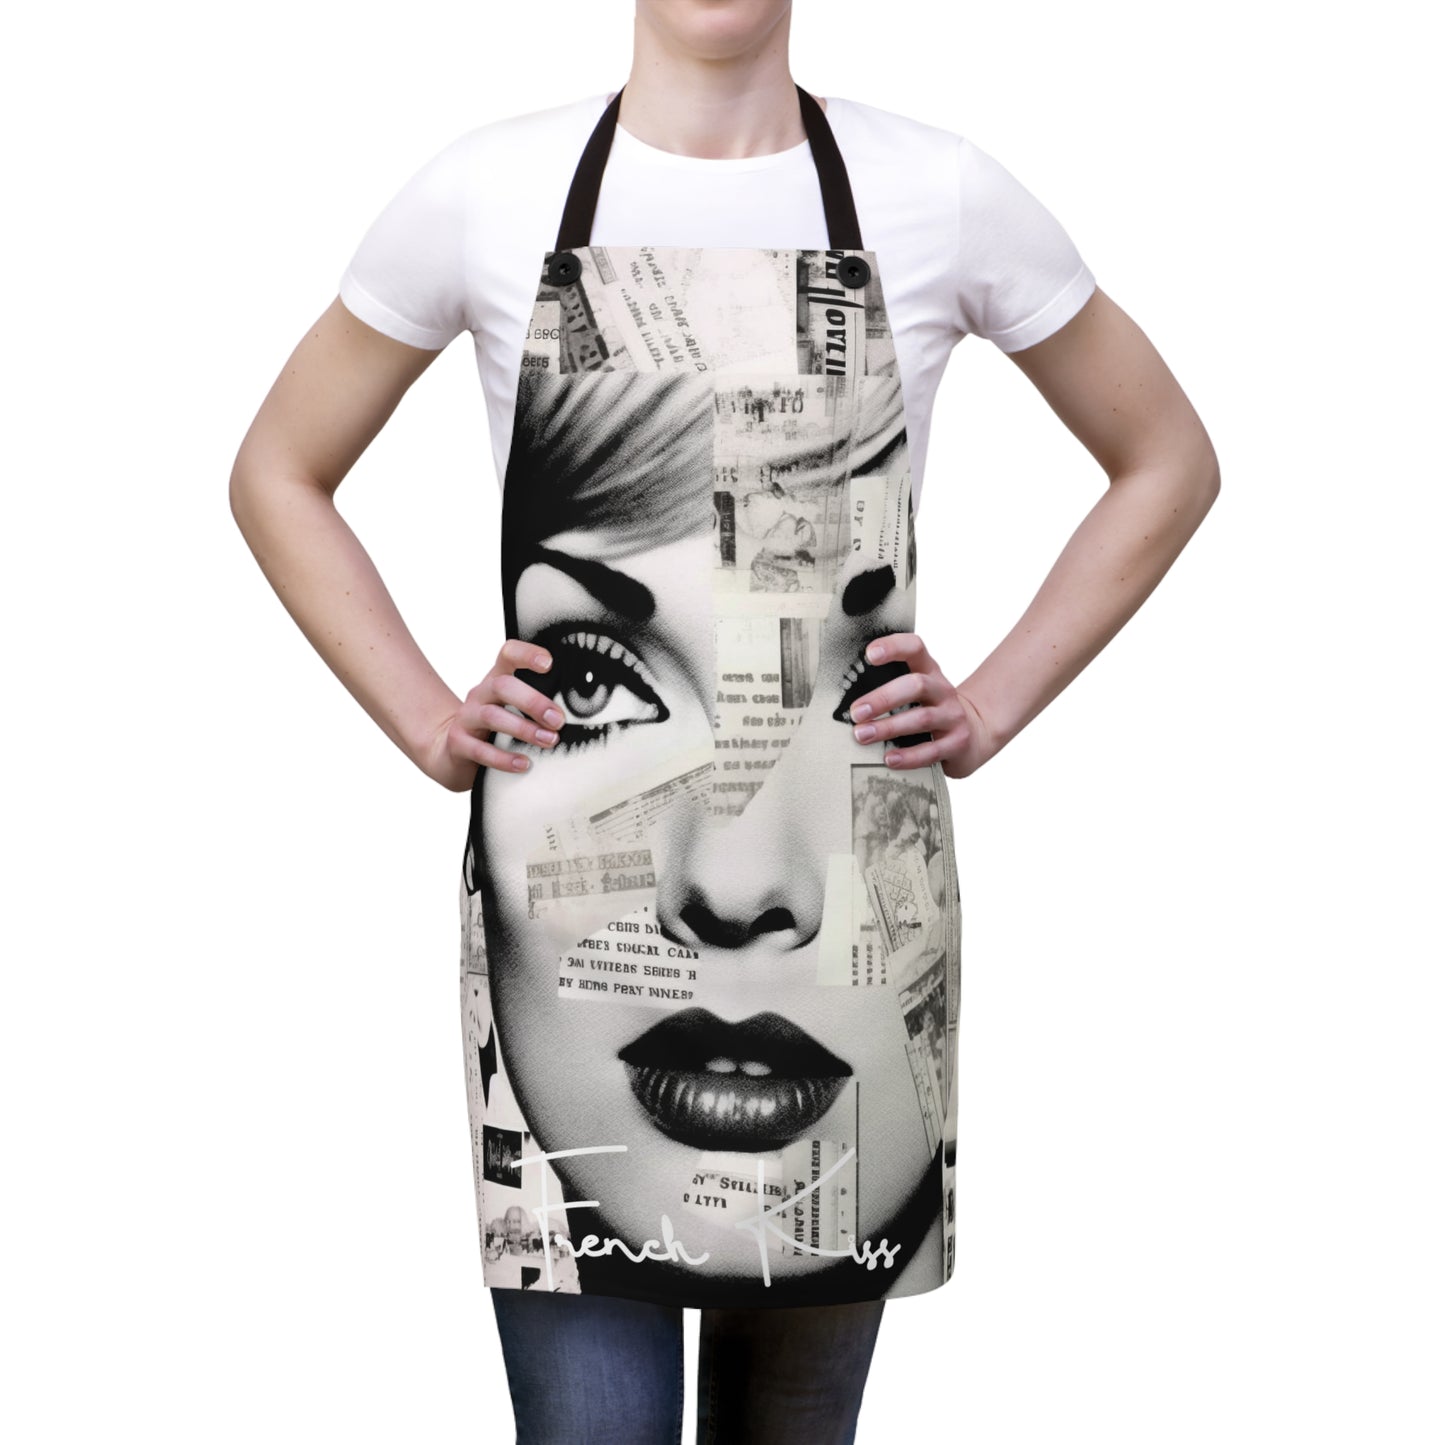 GLAMOUR Chef APRON, French Couture, Pop Art, Travel, Fashion, Gourmet, Cuisine, Cook, France, must have gift item